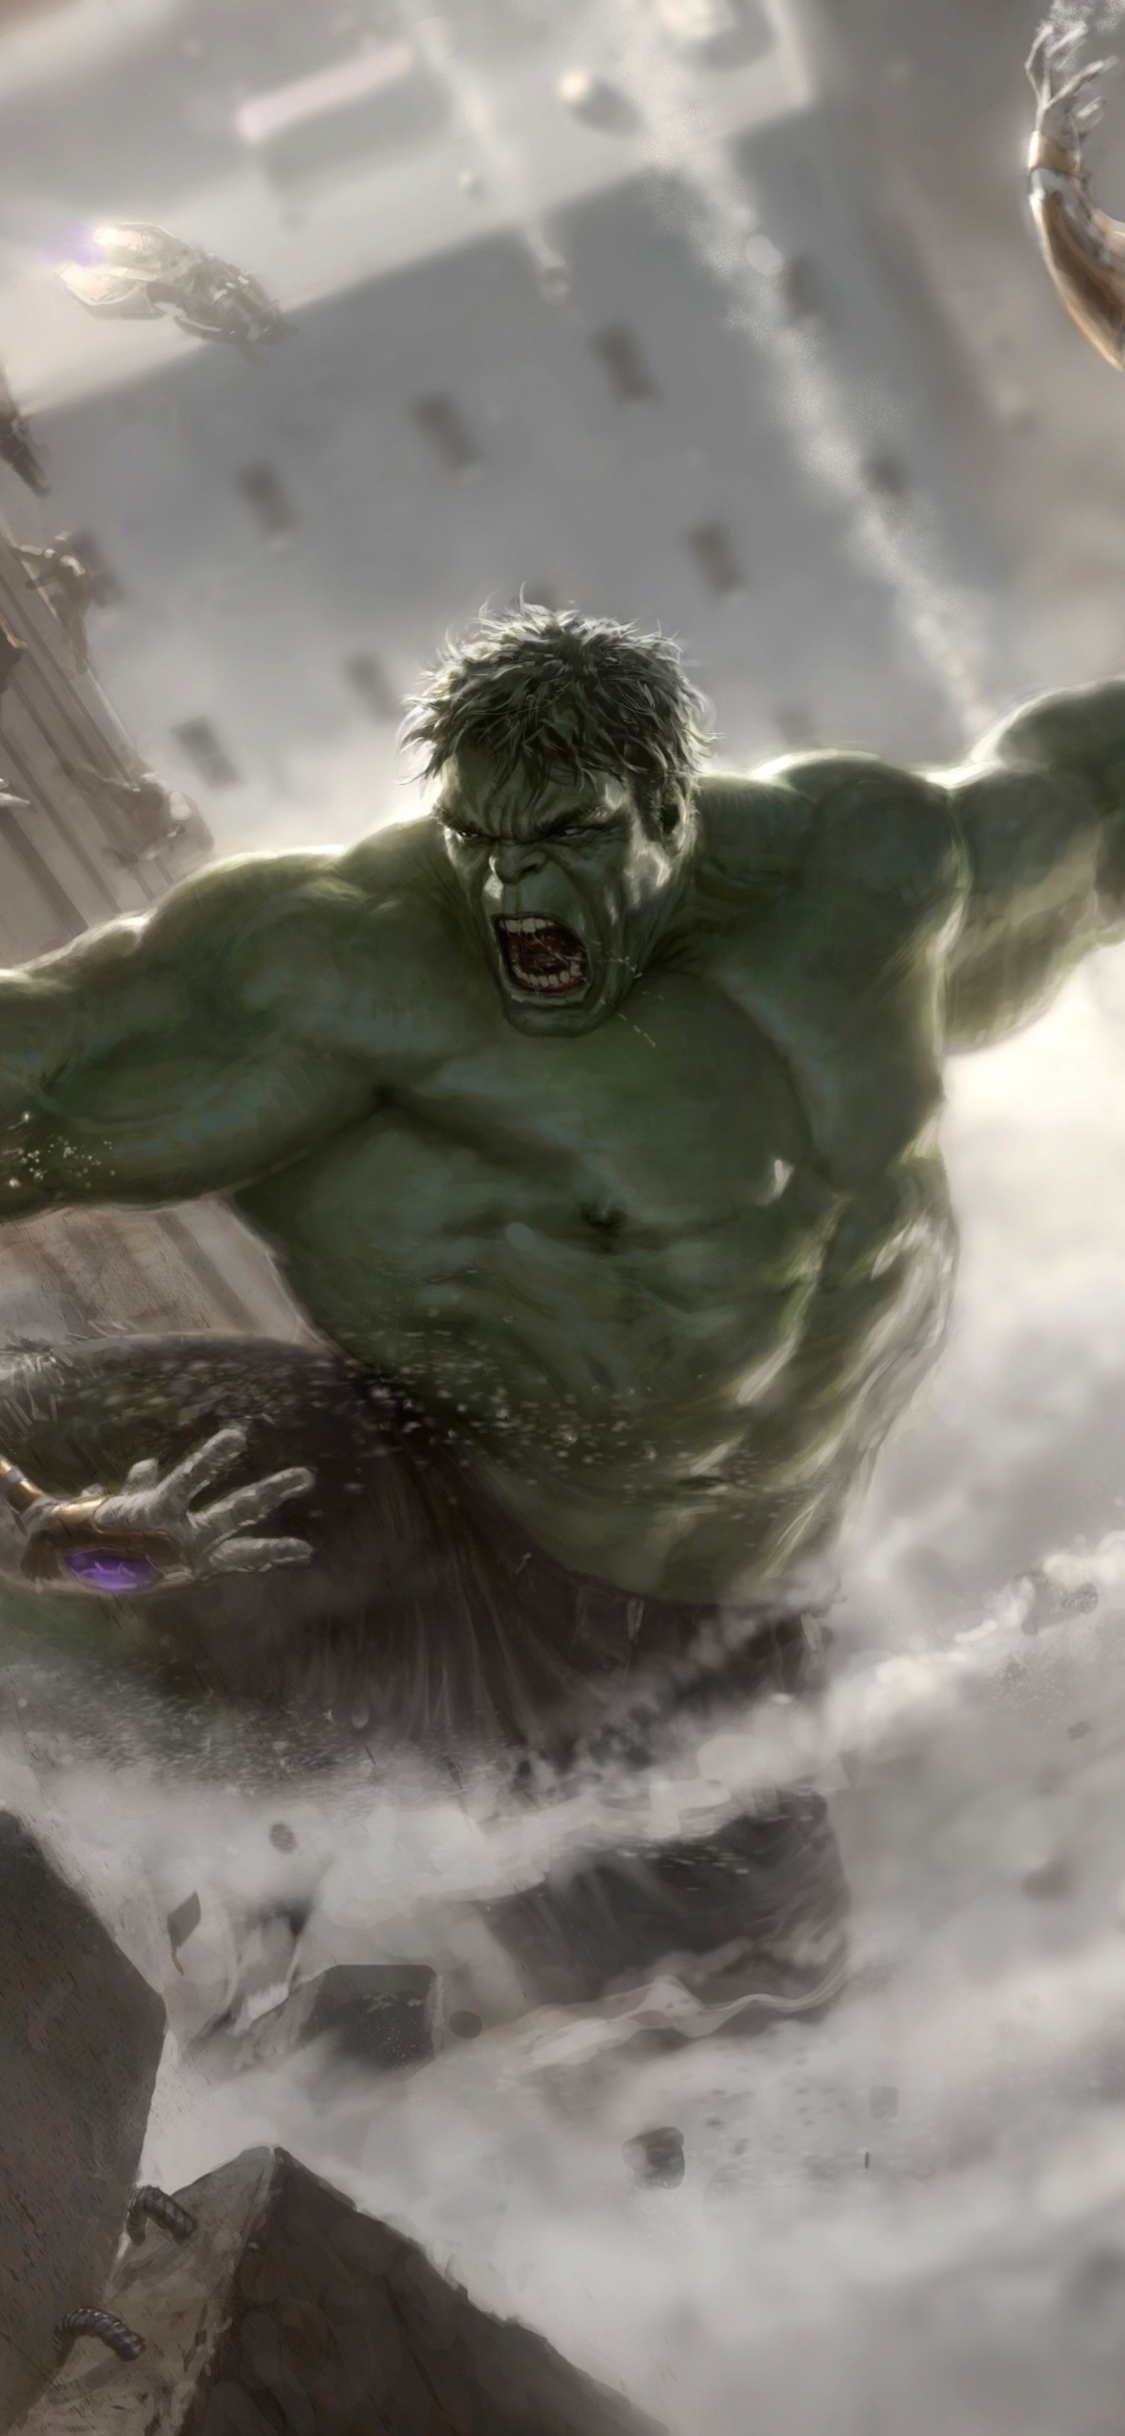 Download wallpaper 1125x2436 angry hulk and robots, avengers: age of ...